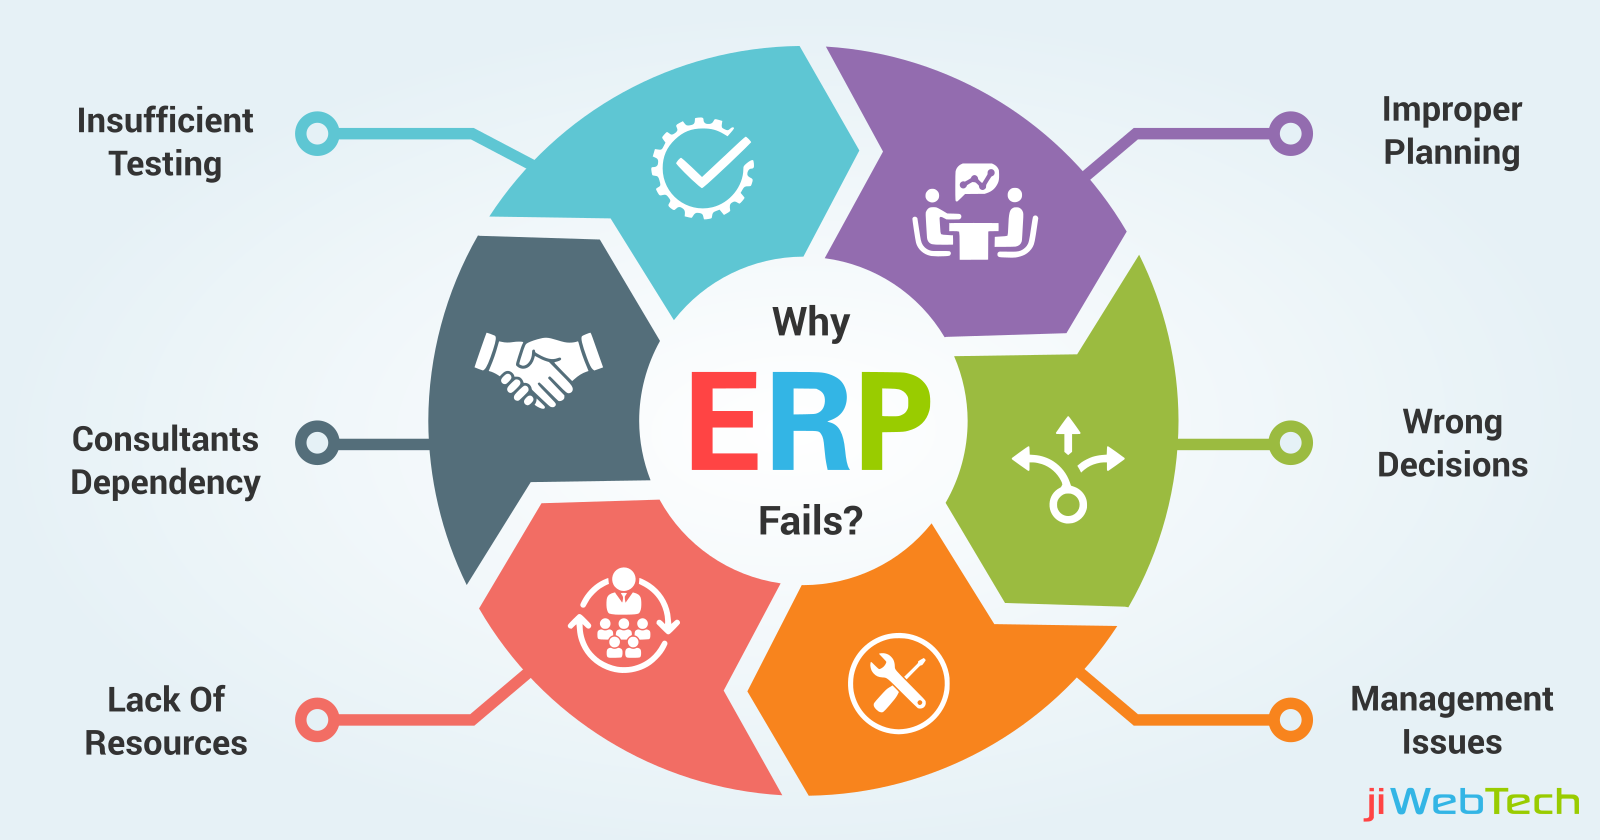 Finding The Root Cause Of ERP Implementation Failures!